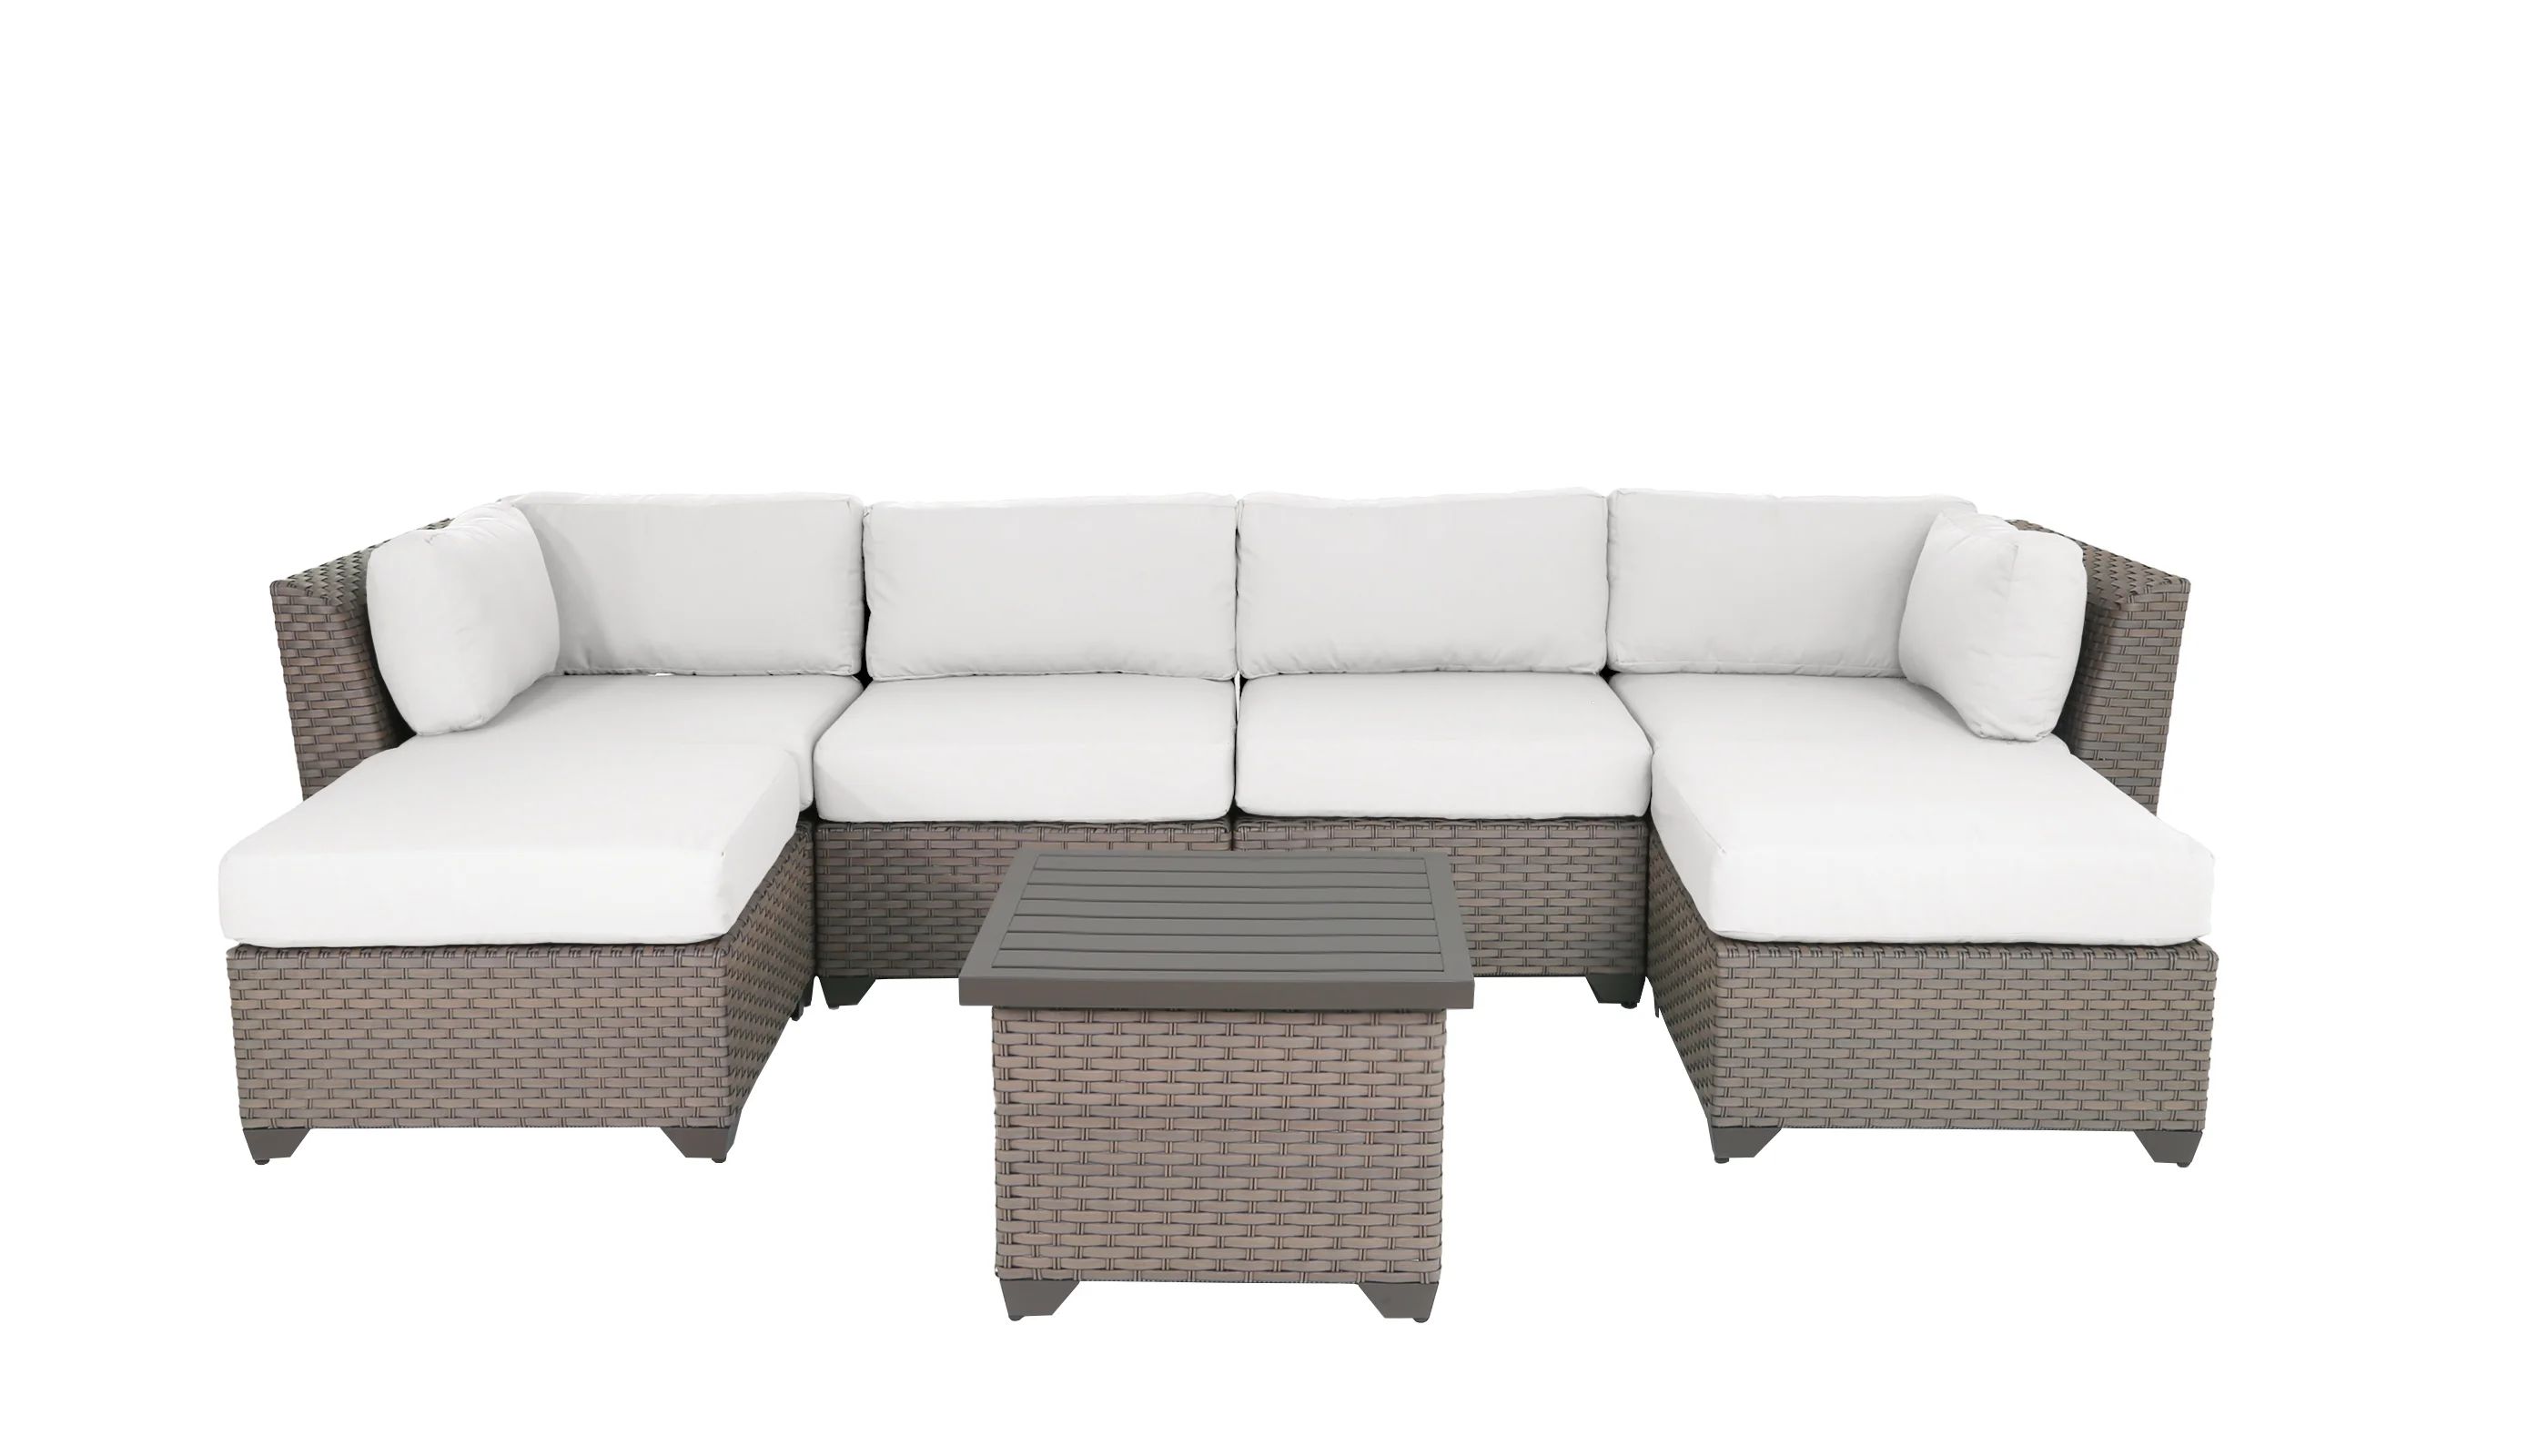 Oppelo 7 Piece Sectional Seating Group with Cushions and Optional Sunbrella Performance Fabric | Wayfair North America